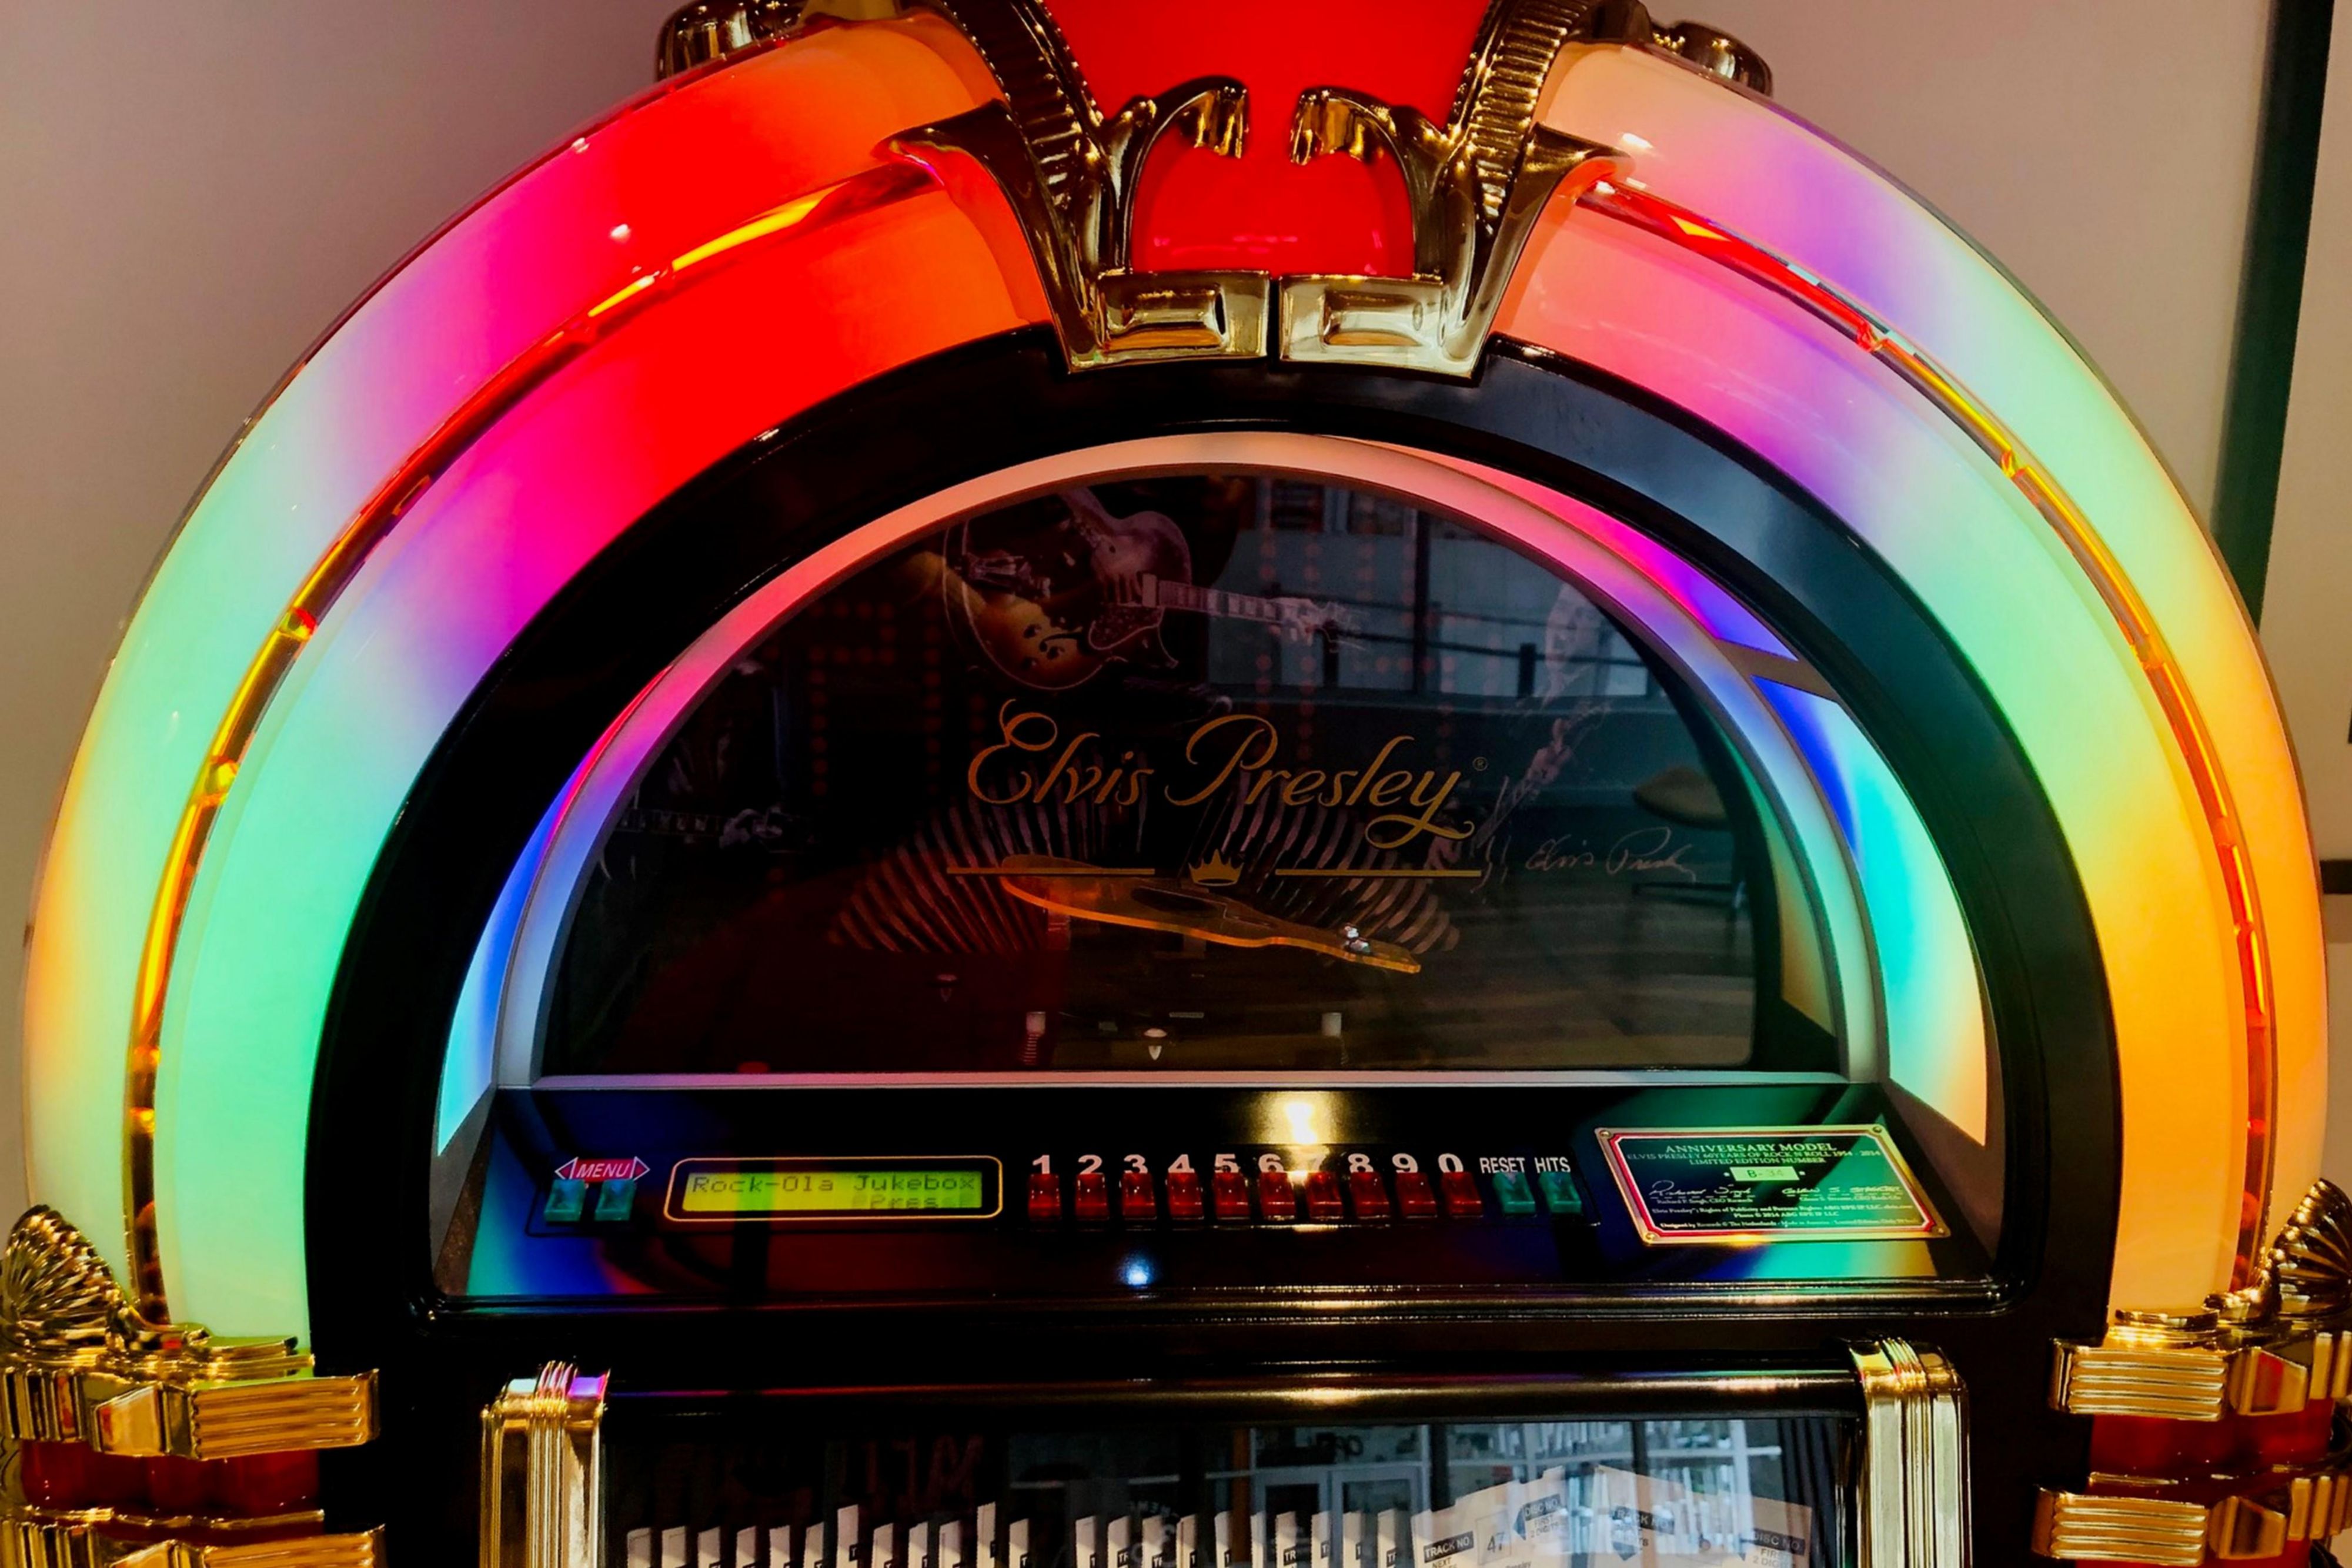 Enjoy tunes from our limited edition Rock-Ola Elvis Presley Jukebox. All the music has ties to Memphis, with either the artist being from Memphis, written in Memphis, about Memphis, or recorded in Memphis. The best part? It's free! Play as many songs as you wish, courtesy of Hotel Indigo Memphis Downtown!